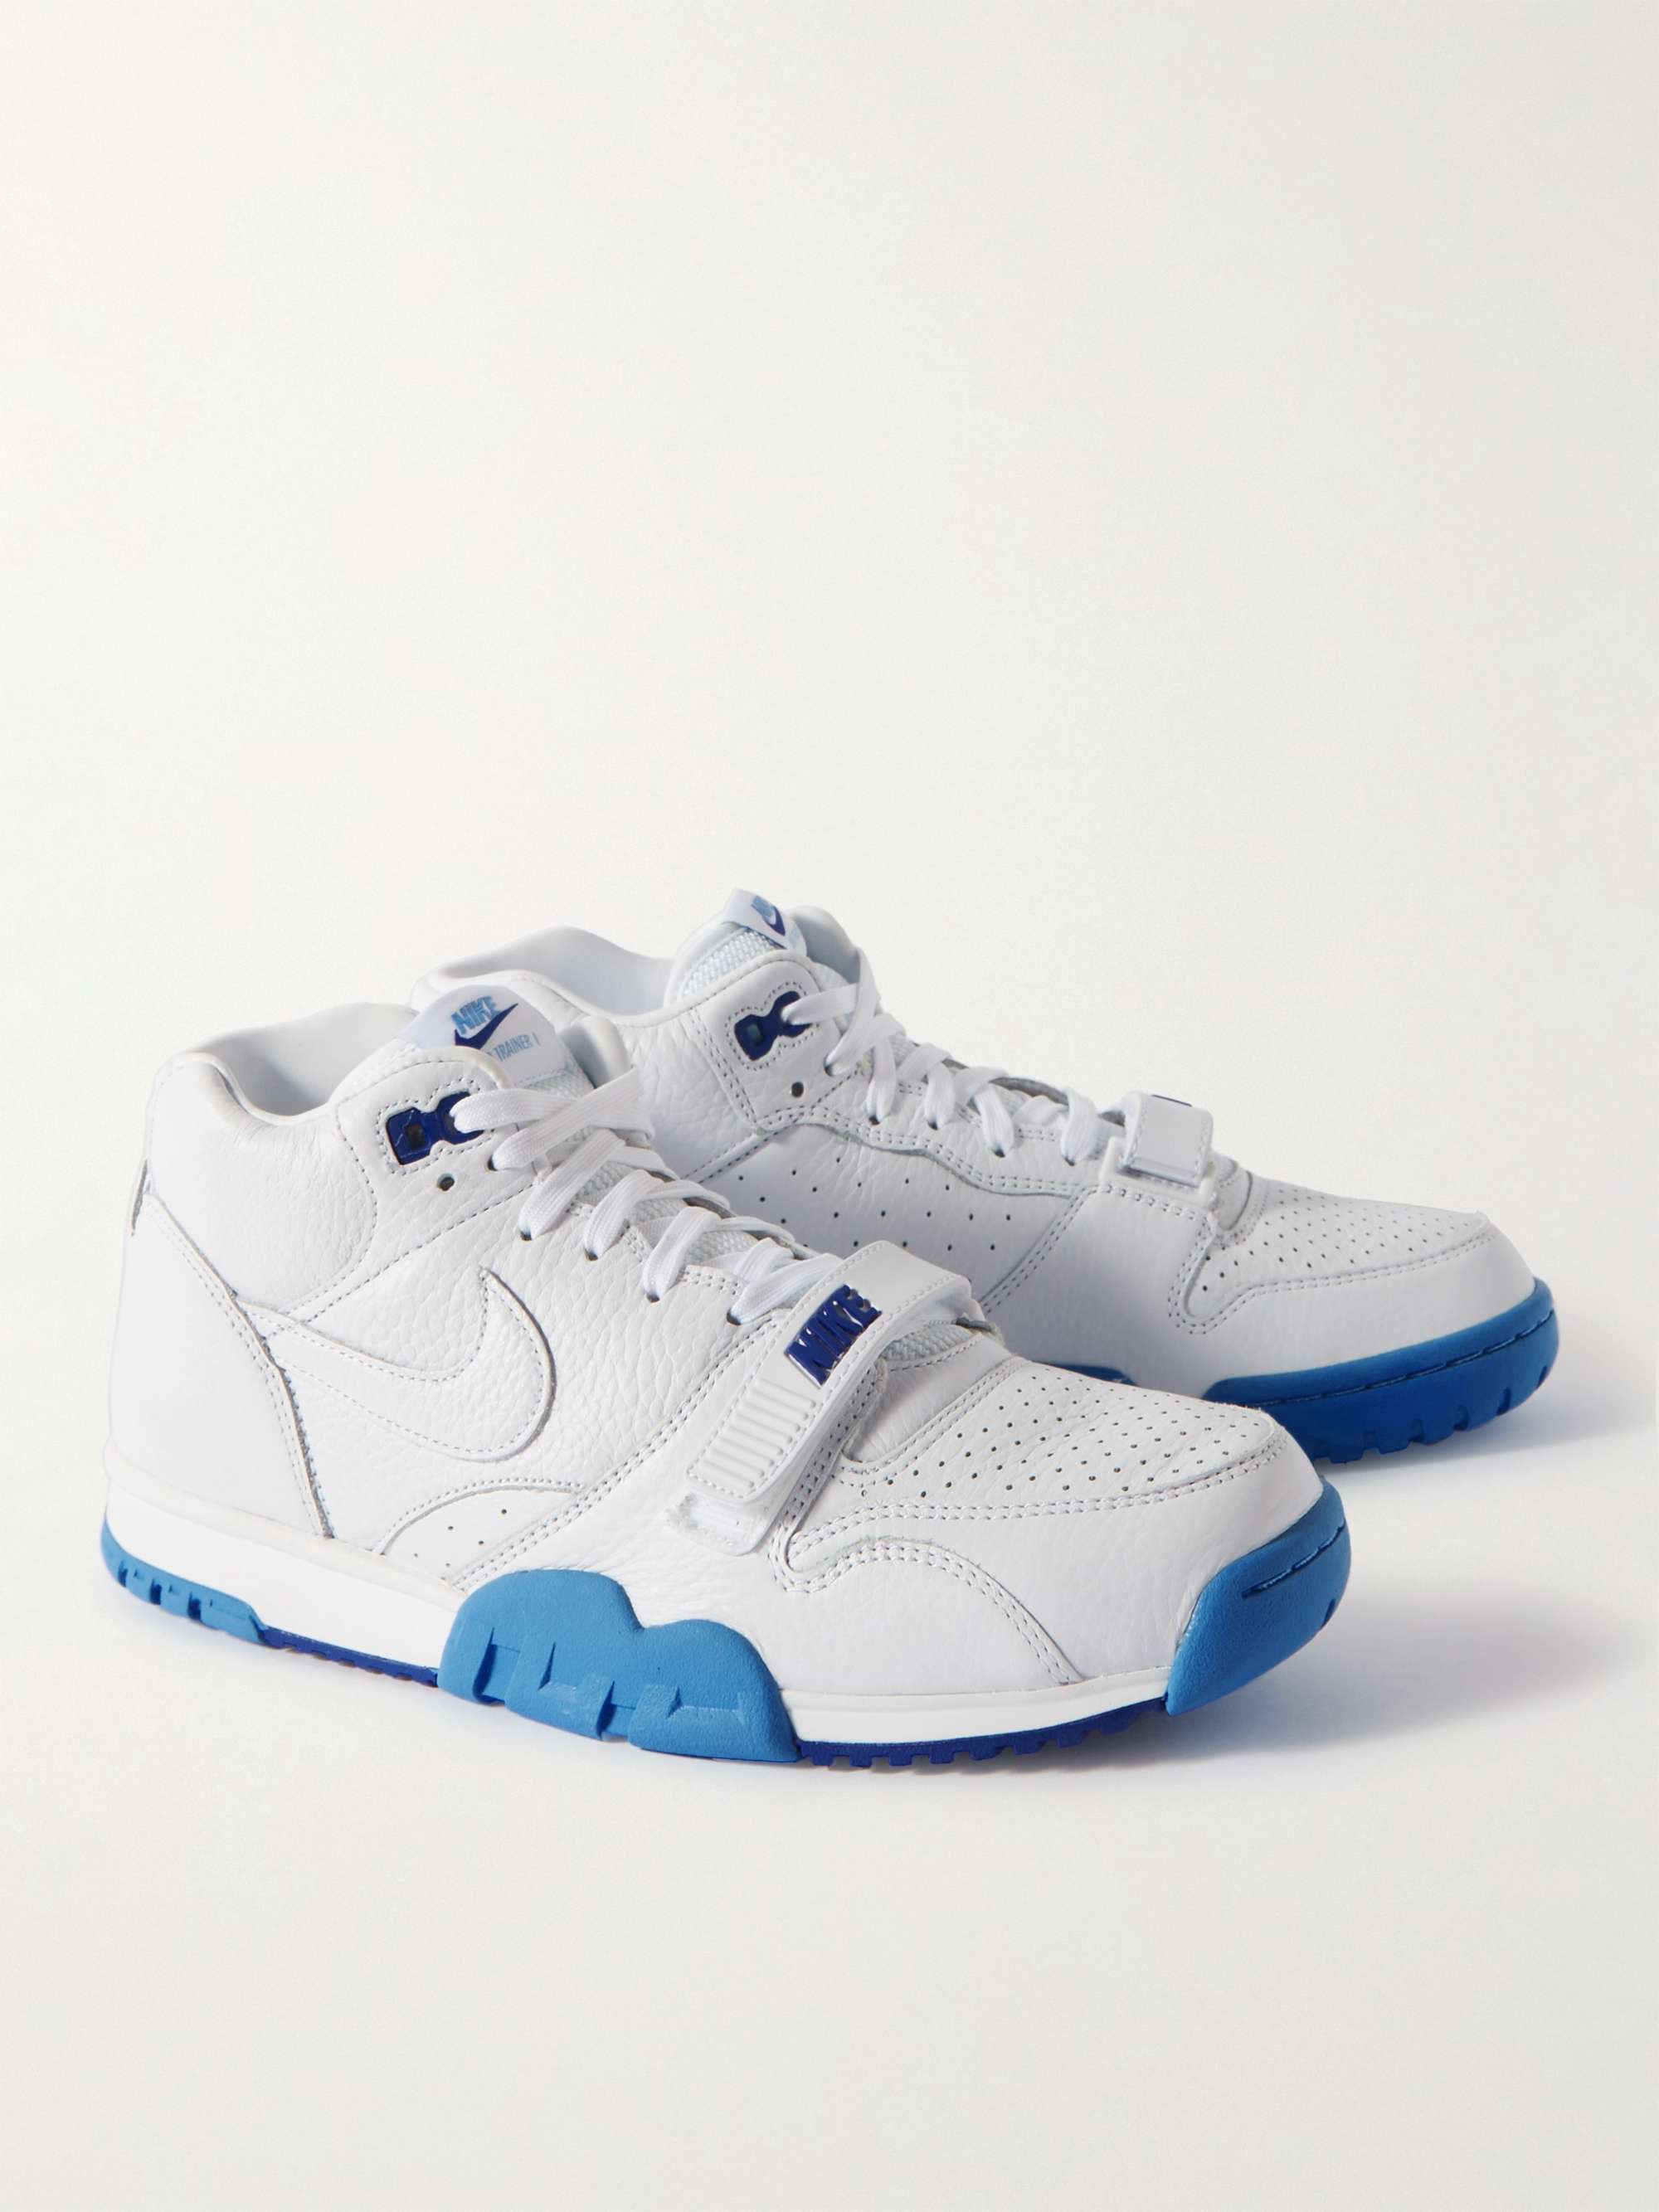 NIKE Air Trainer 1 Leather Sneakers